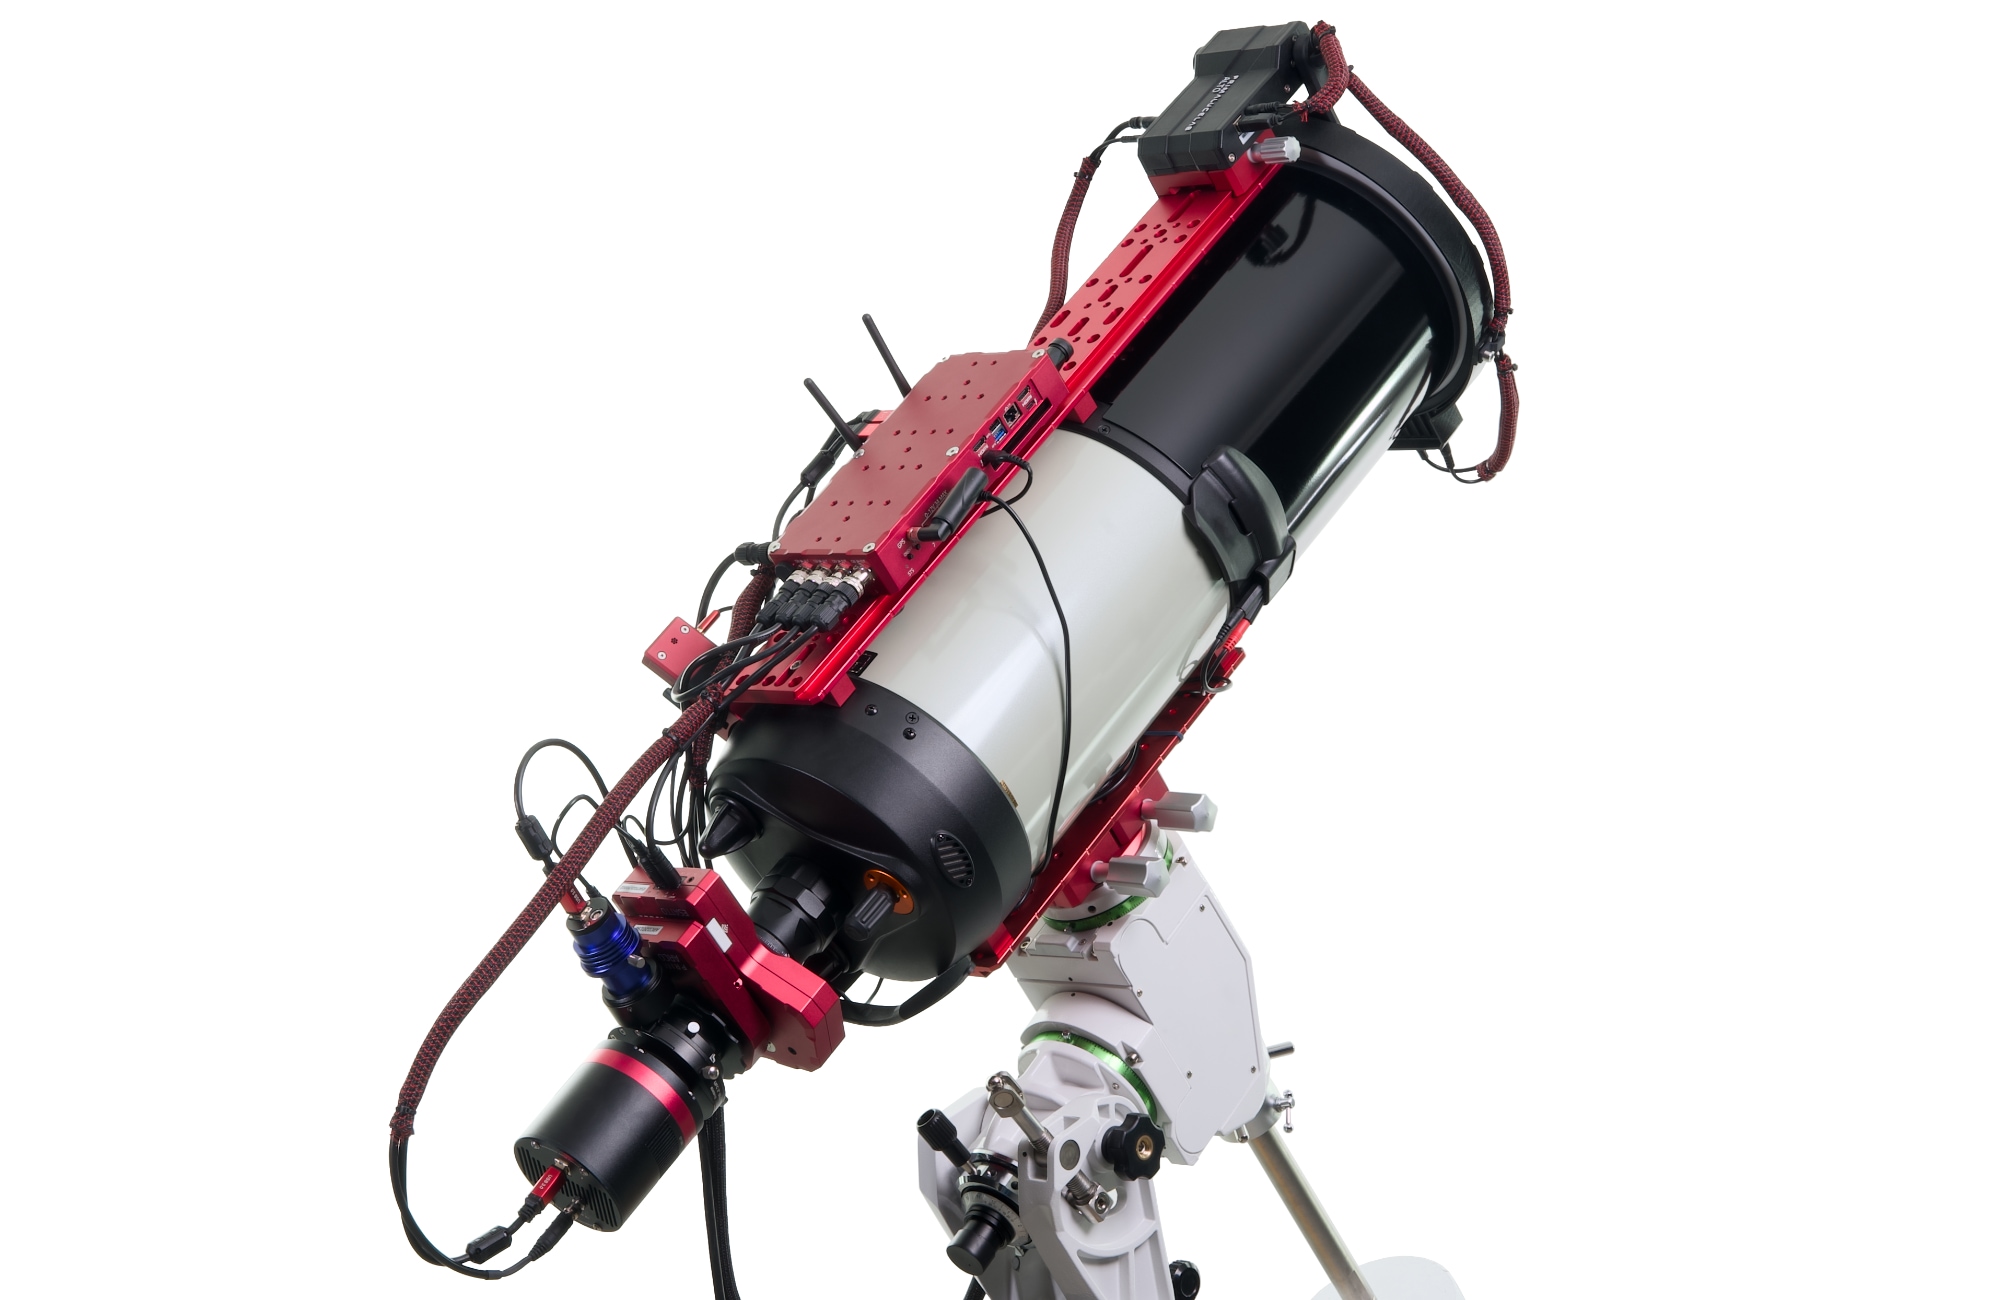 How to provide a rotating focuser to EdgeHD 8” with 0.7x reducer for deep-sky astrophotography